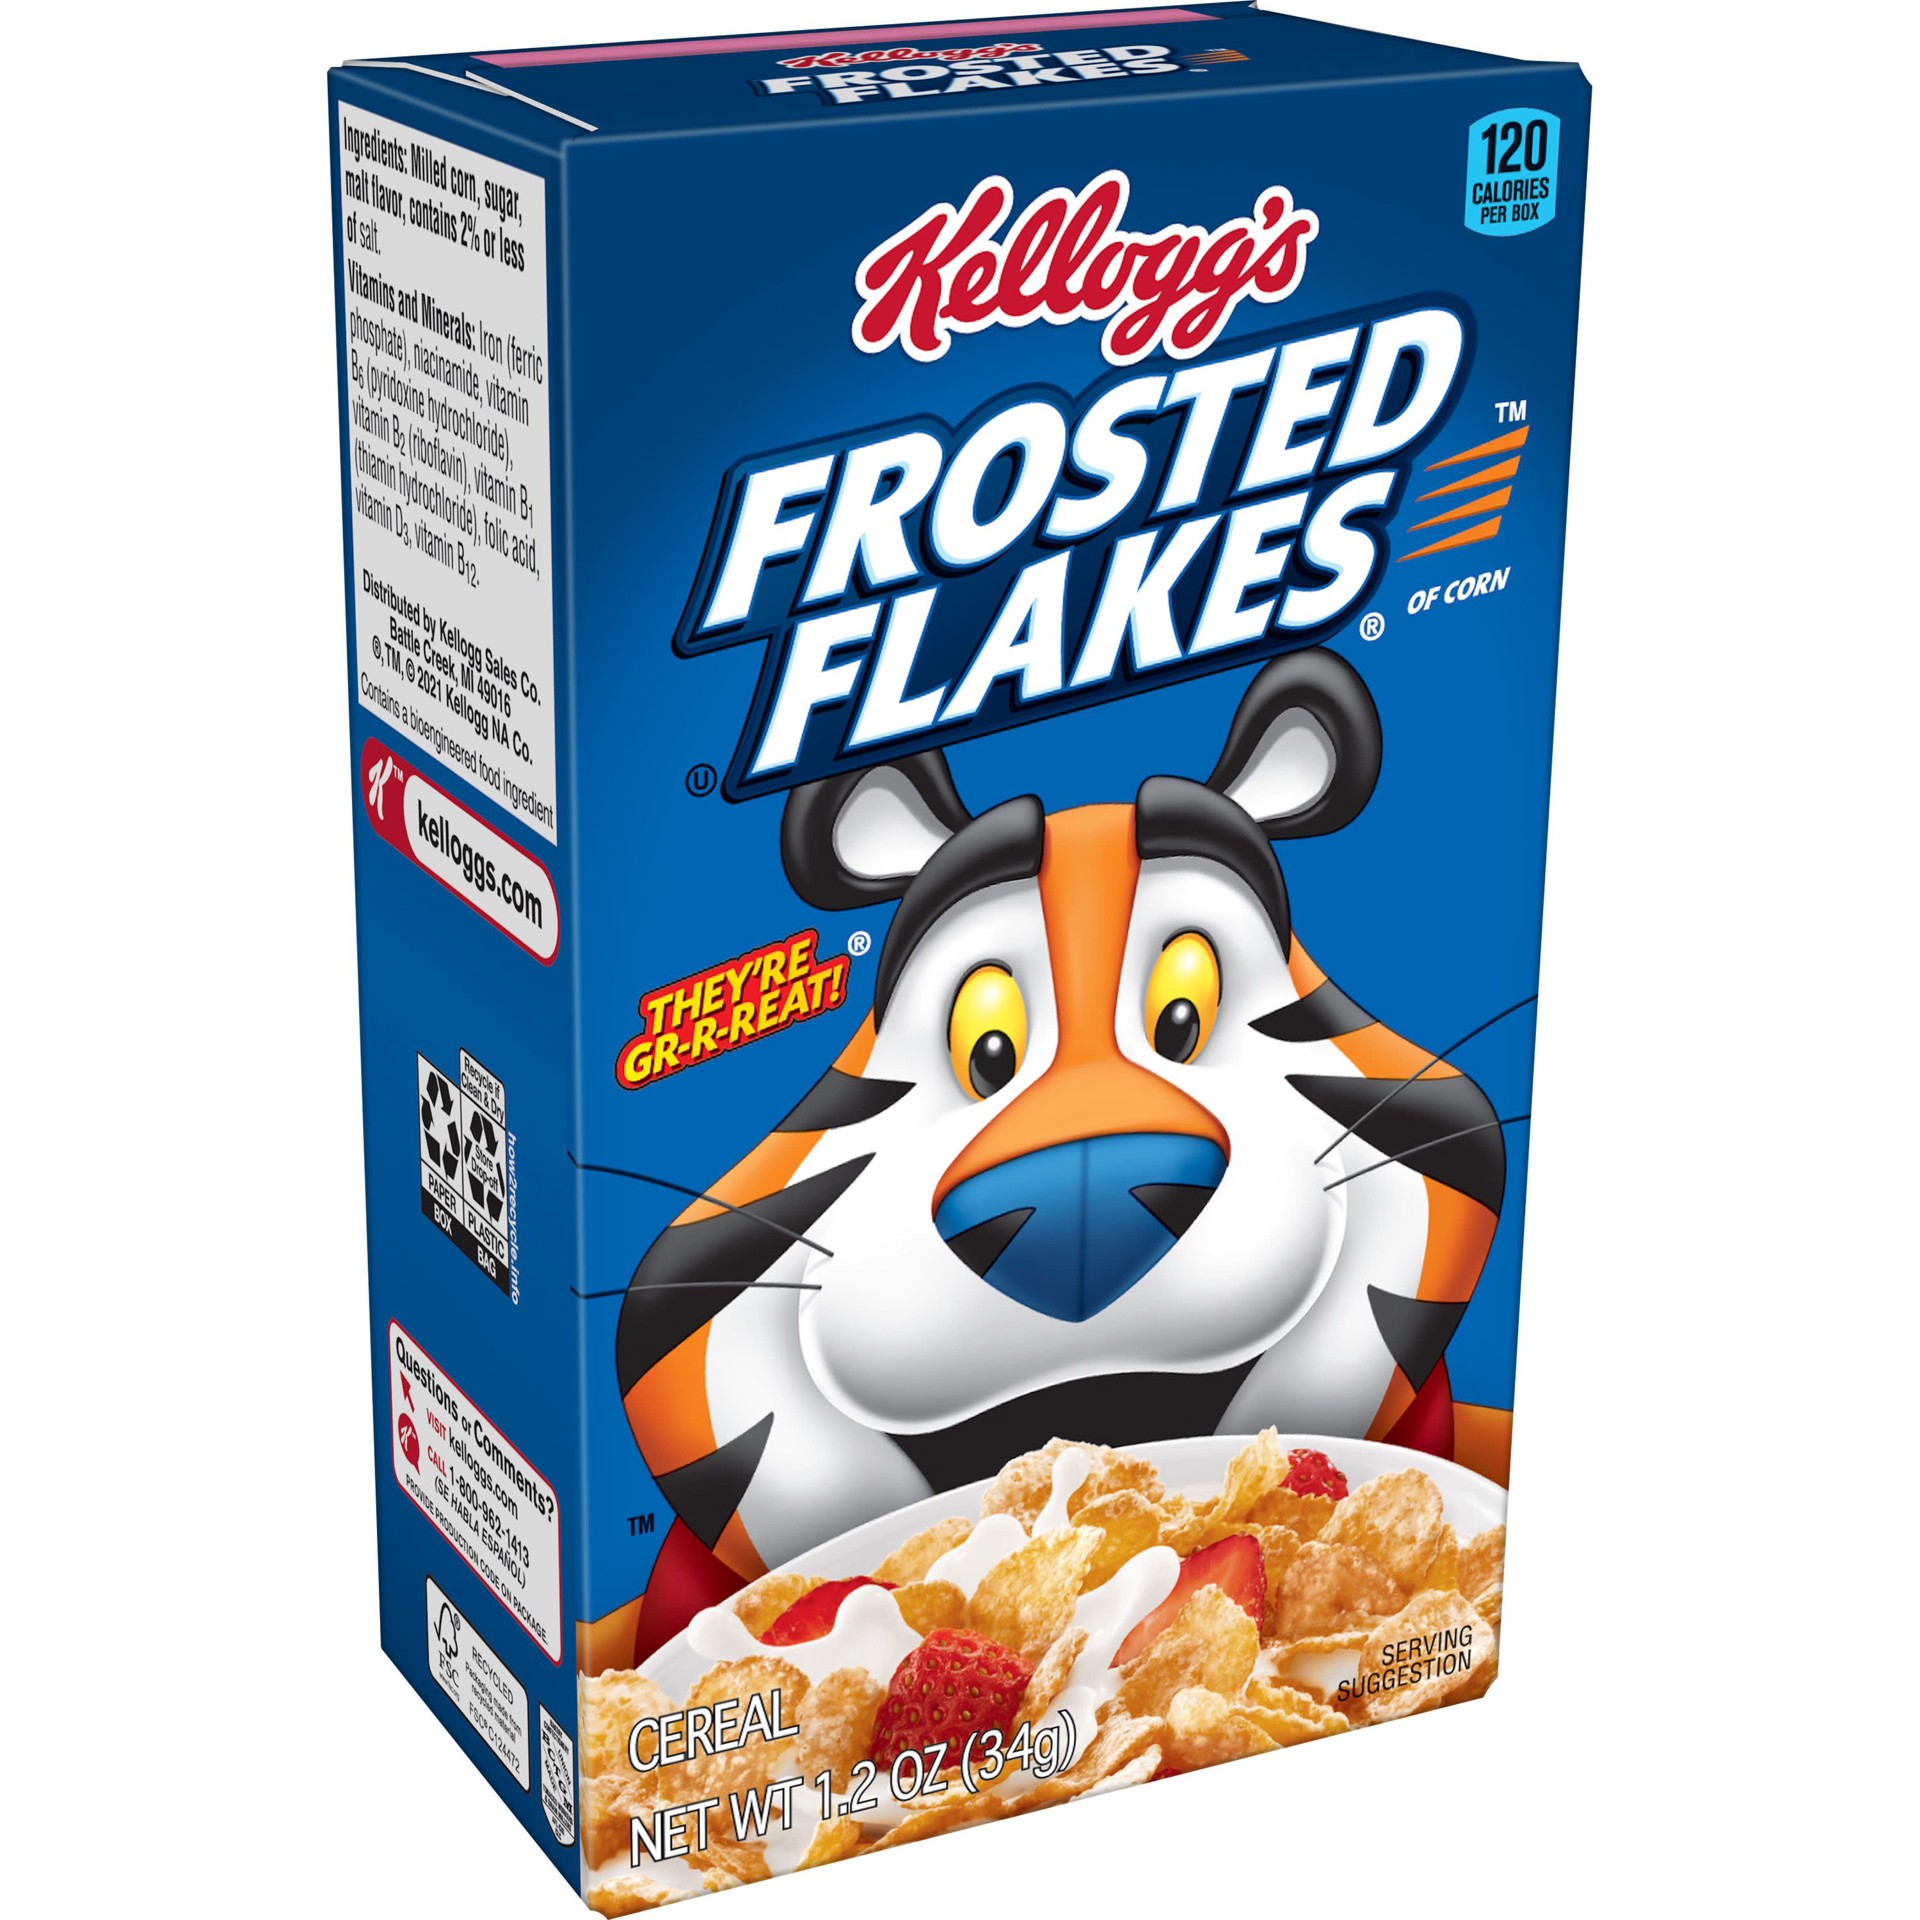 slide 1 of 7, Frosted Flakes Kellogg's Frosted Flakes Breakfast Cereal, 8 Vitamins and Minerals, Kids Snacks, Original, 1.2oz Box, 1 Box, 1.2 oz